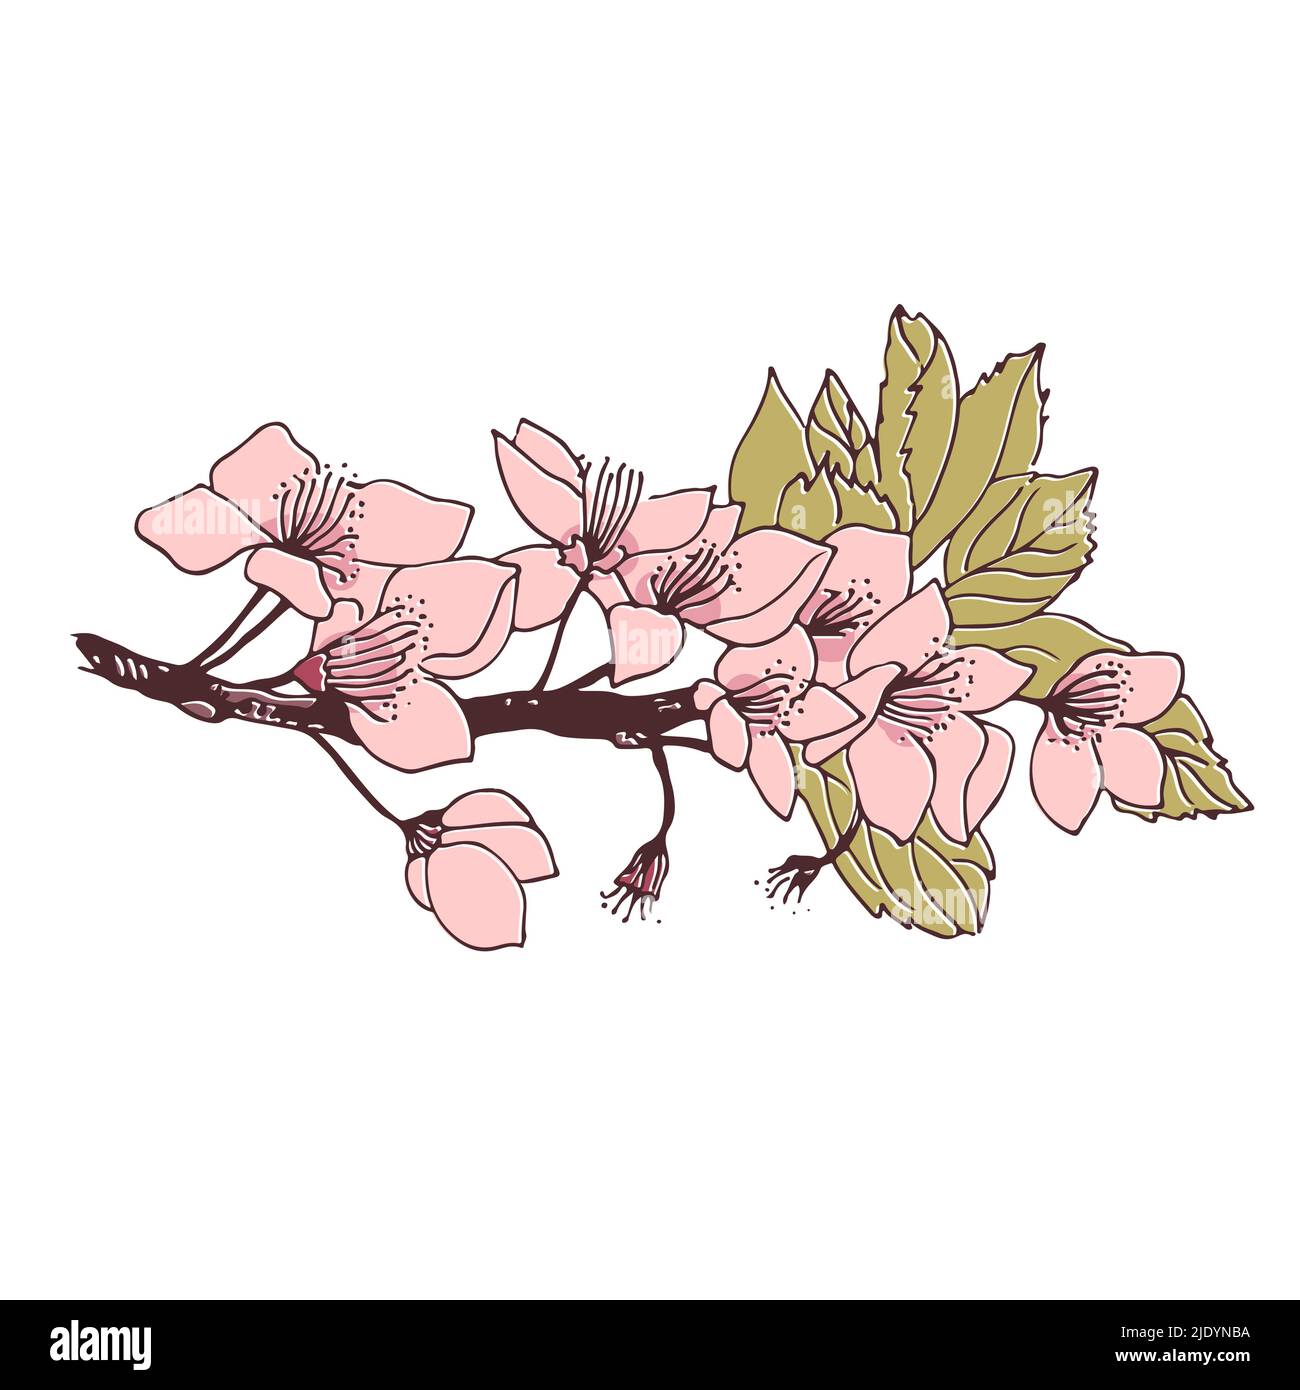 Hand Drawn Outline Cherry Branches Flowers Stock Vector (Royalty Free)  748520614 | Shutterstock | How to draw hands, Botanical drawings, Flower  branch